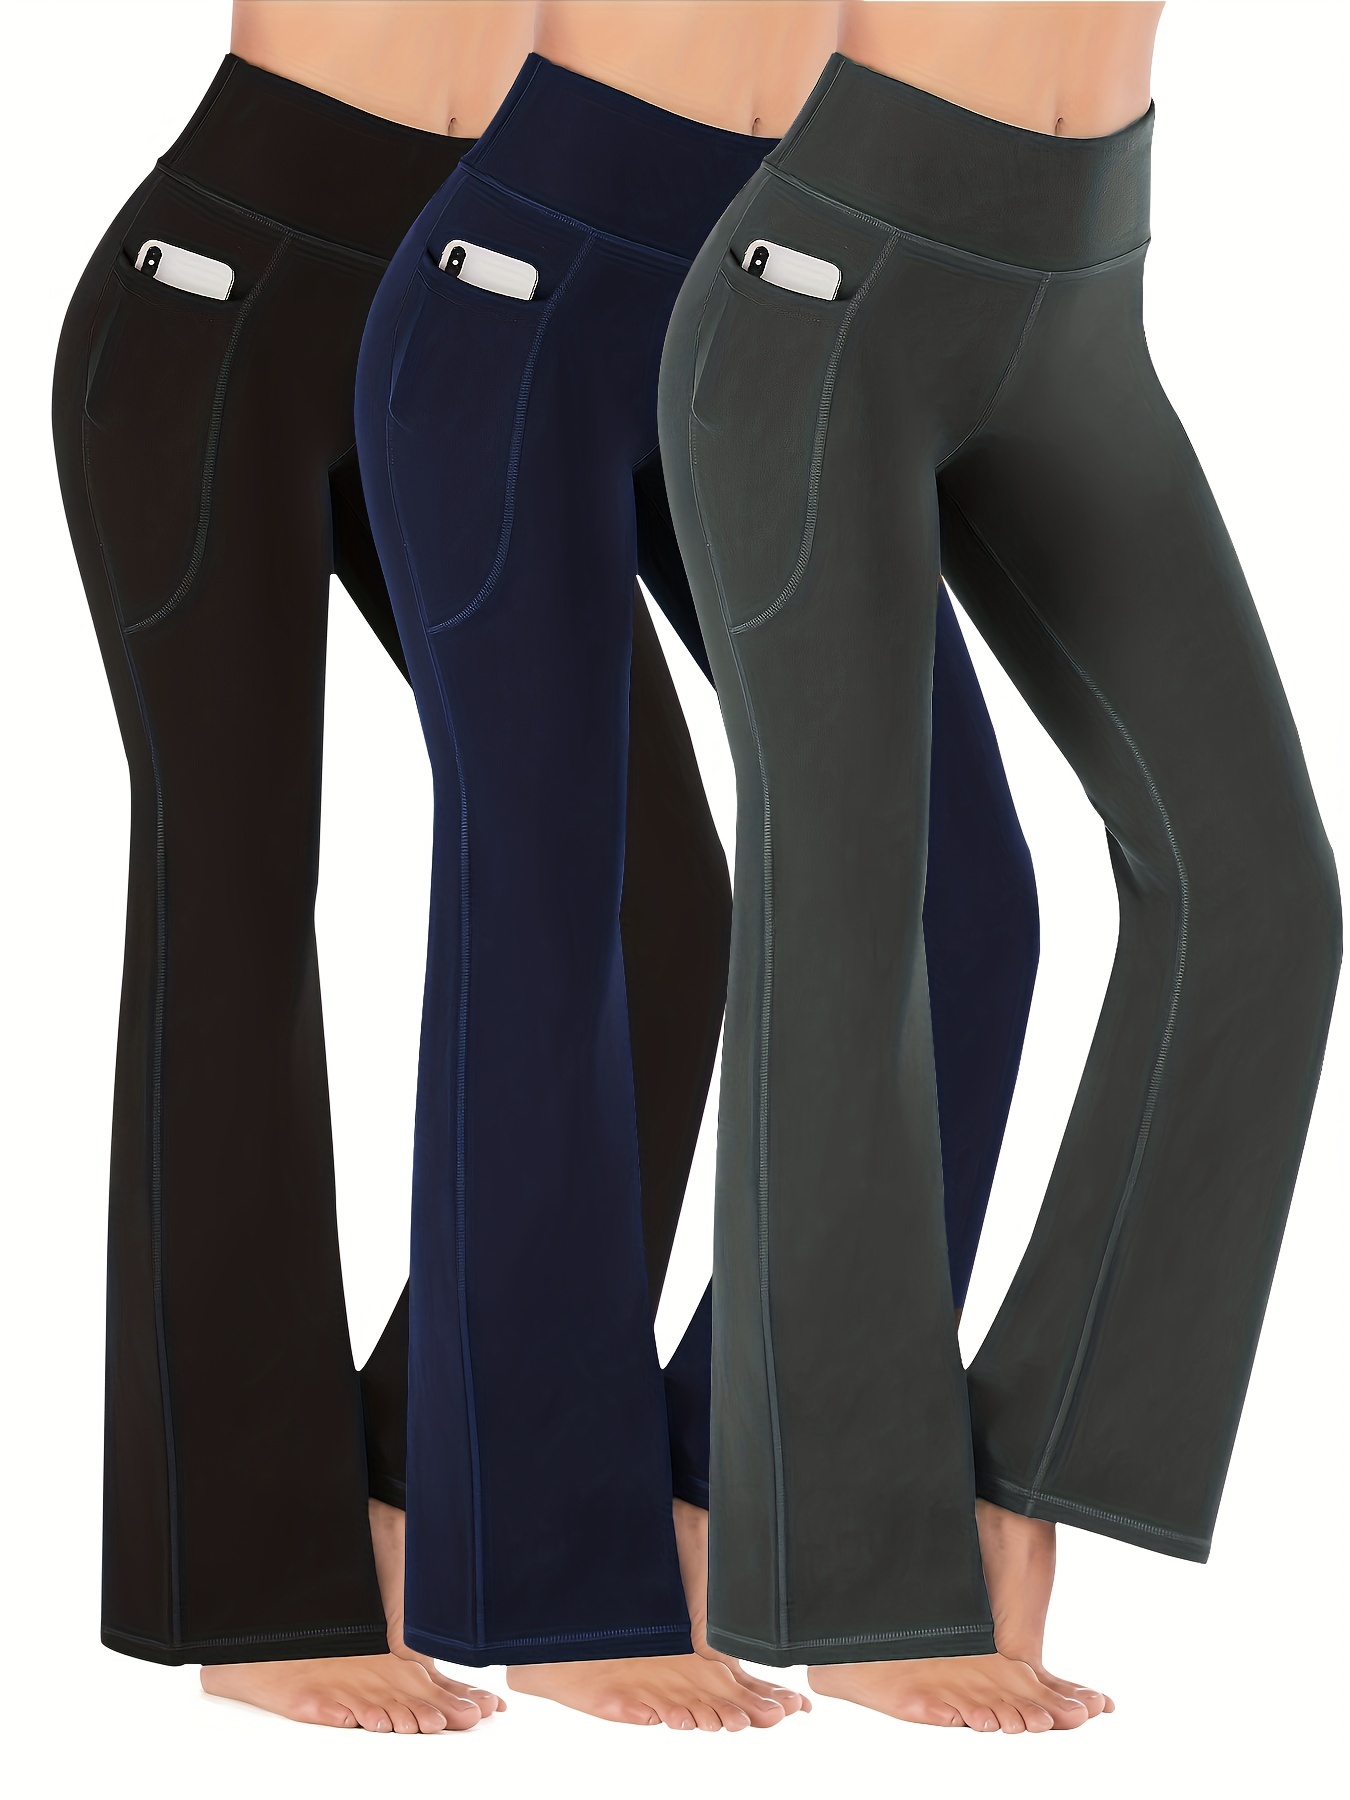 IUGA Bootcut Yoga Pants for Women with Pockets High Philippines